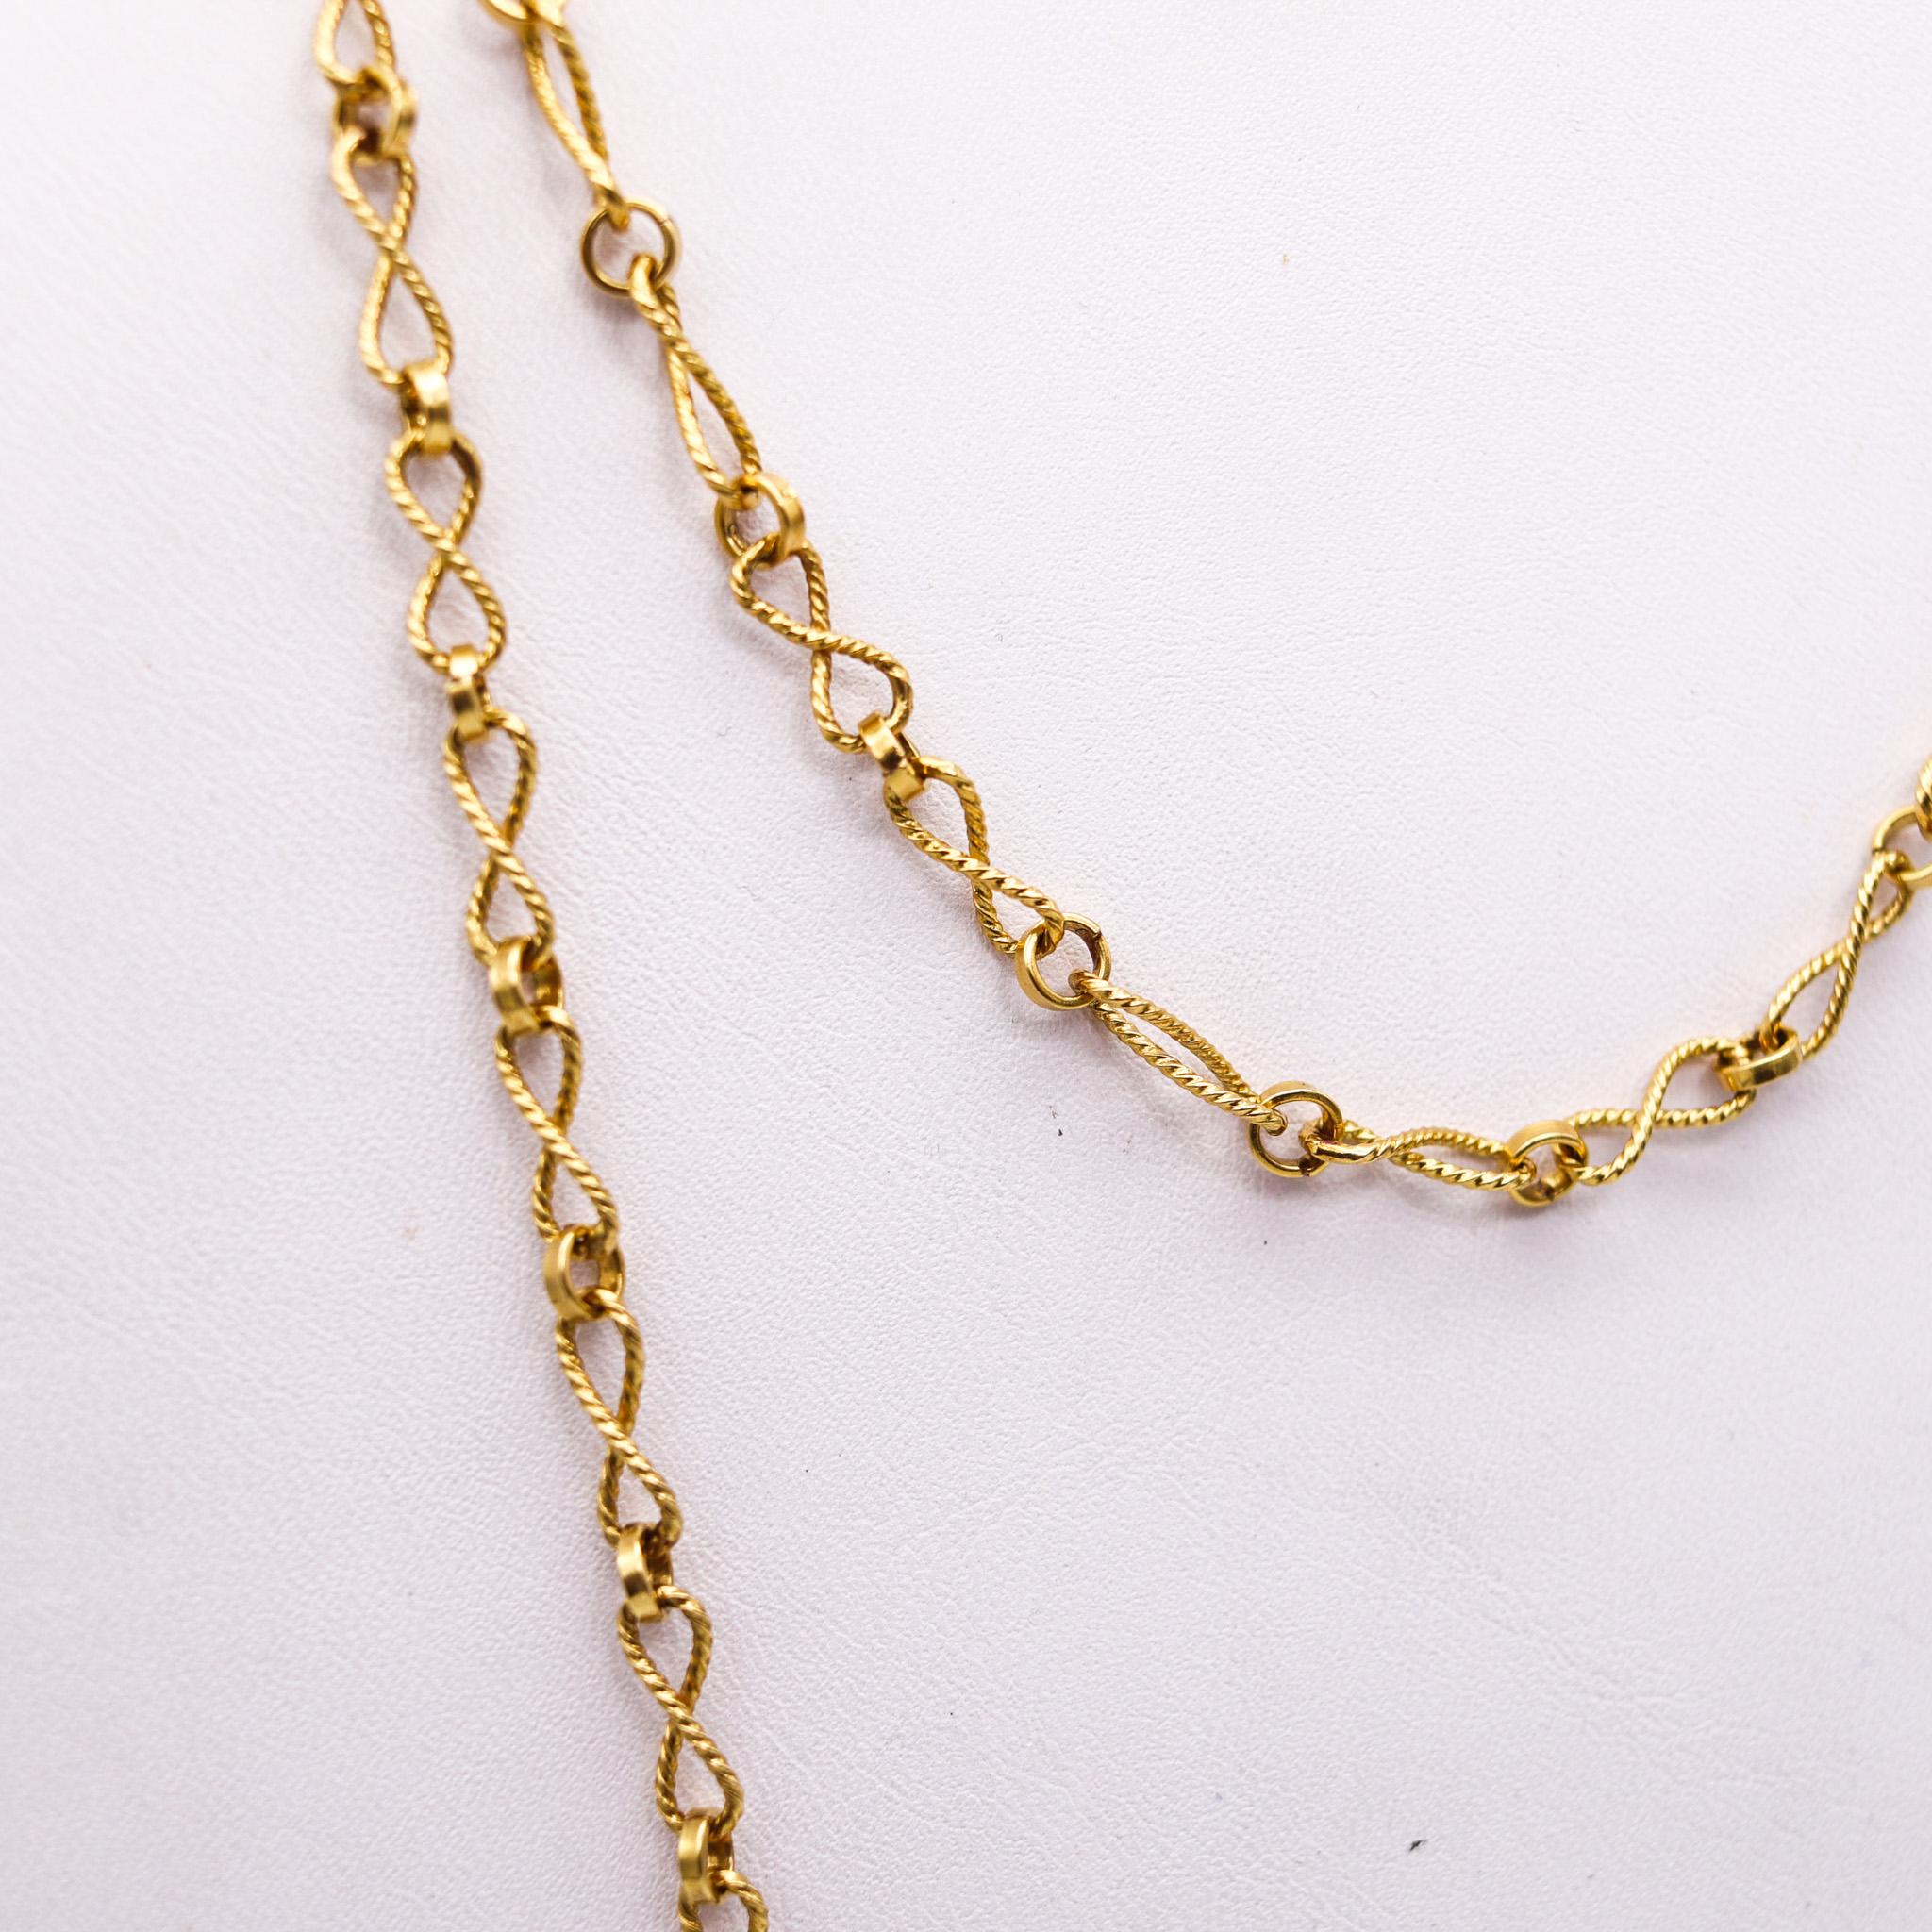 Retro-modernist chain designed by Alessi Domenico. 

Beautiful retro modernist chain, created in Vicenza Italy at the goldsmith atelier of Alessi Domenico, back in the late 1960. It was crafted with multiples twisted wires links made up in solid